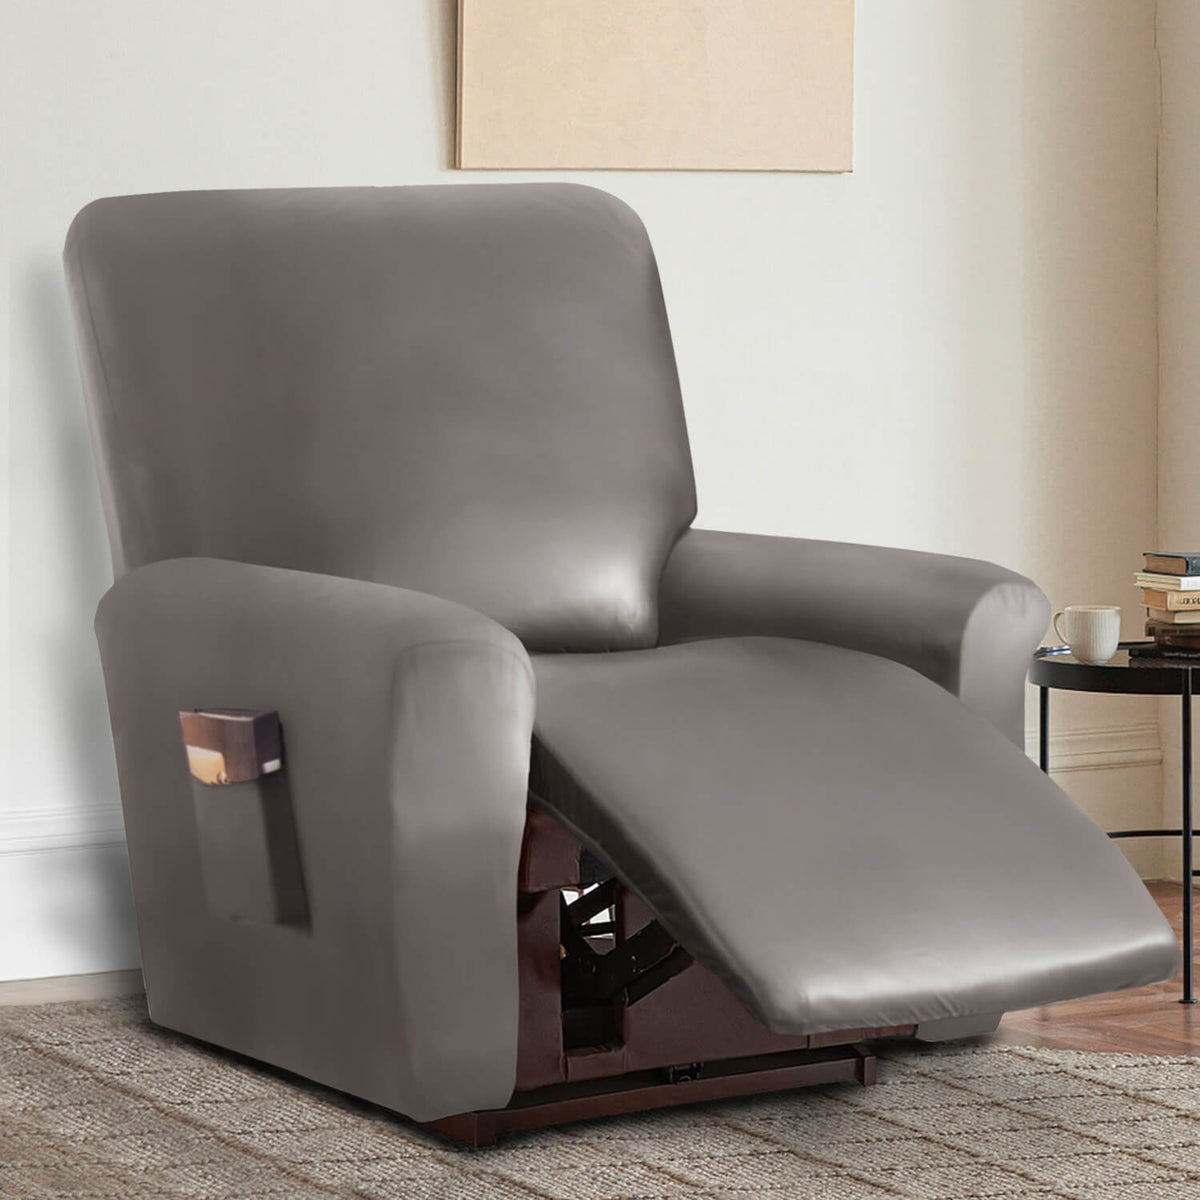 Crfatop Waterproof PU Leather Recliner Slipcover Recliner1-seaterTaupe